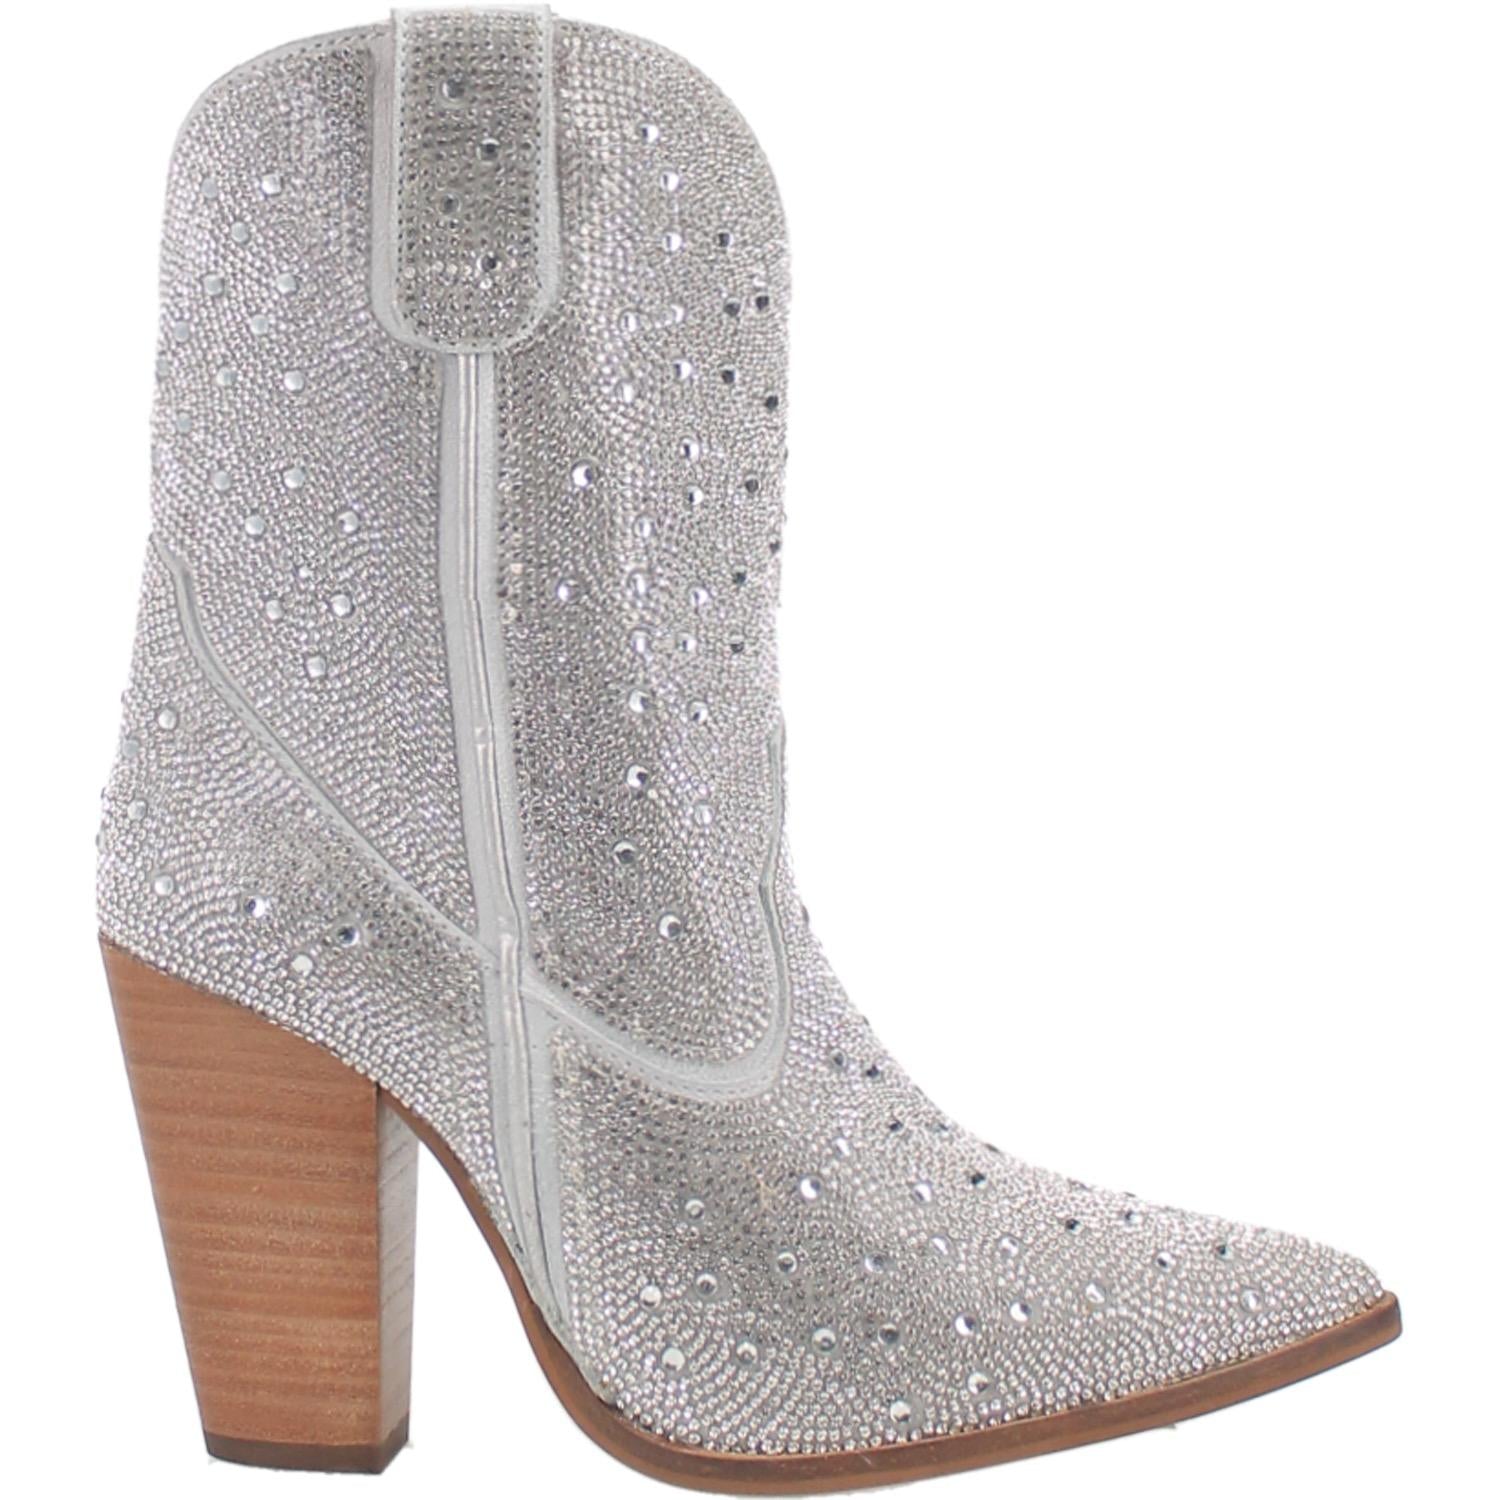 Neon Moon Bling Silver Leather Booties (DS)